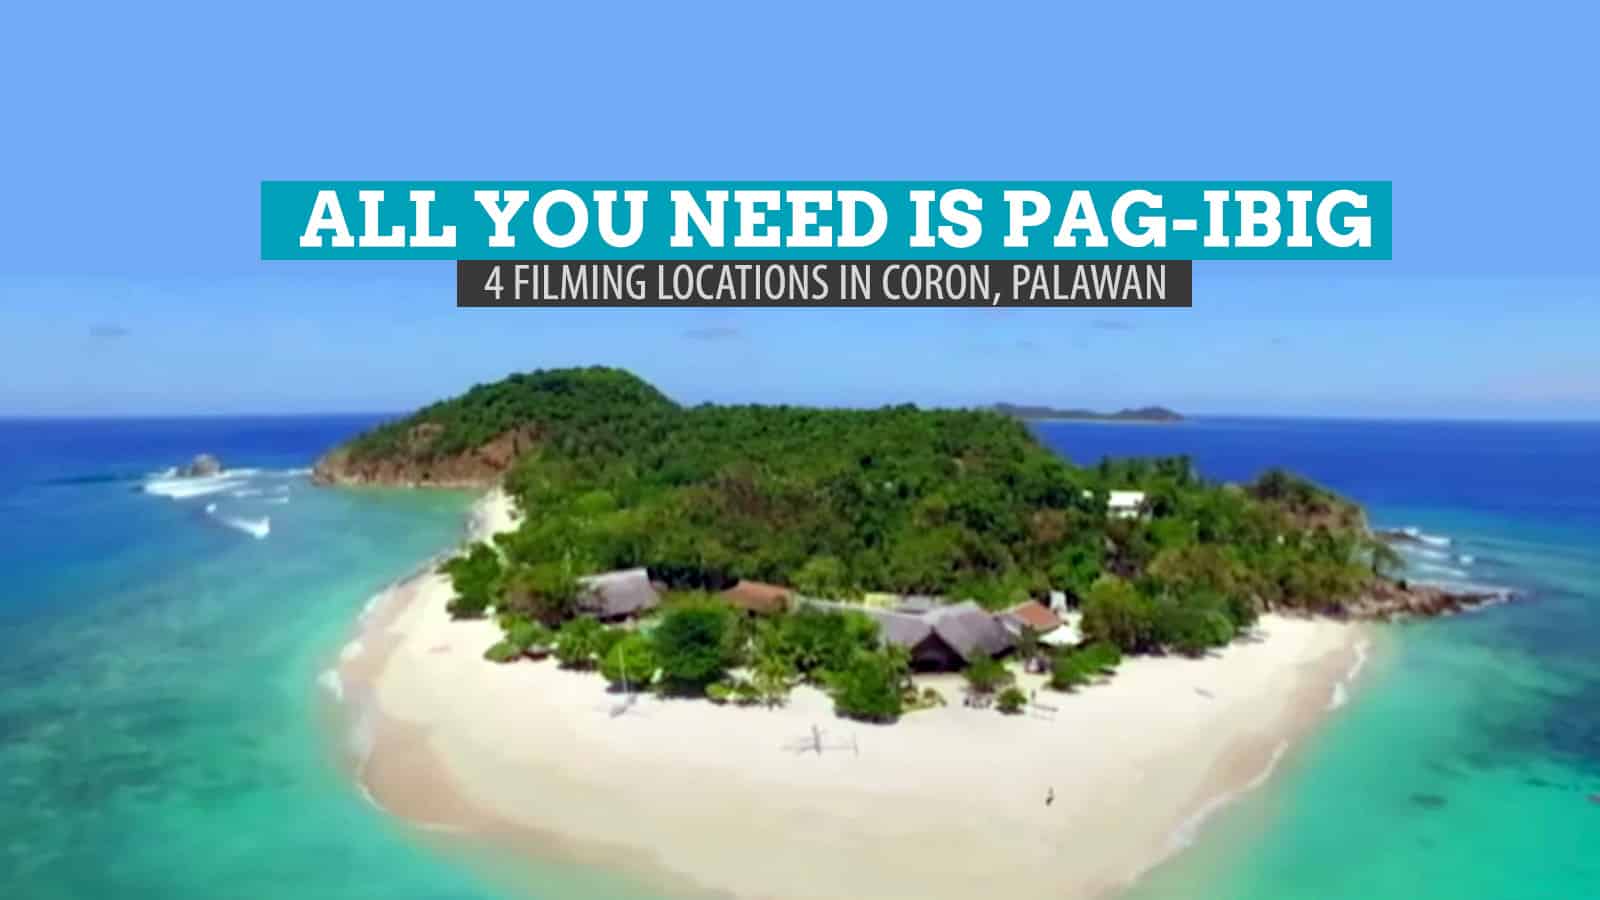 All You Need is Pag-ibig: 4 Filming Locations in Coron, Palawan